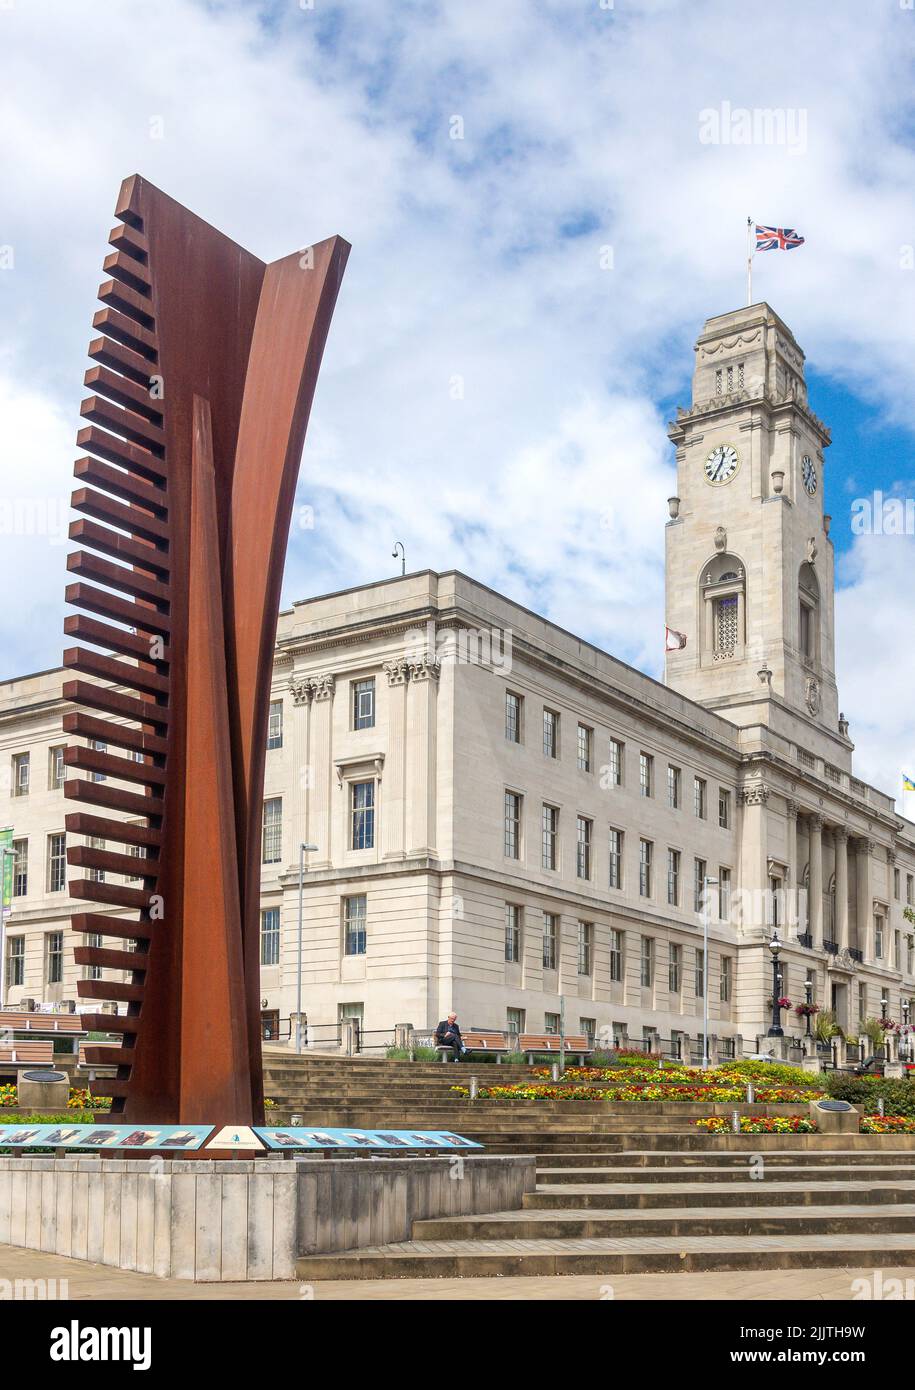 Barnsley Town Hall et la sculpture « Crossing vertical », Church Street, Barnsley, South Yorkshire, Angleterre, Royaume-Uni Banque D'Images